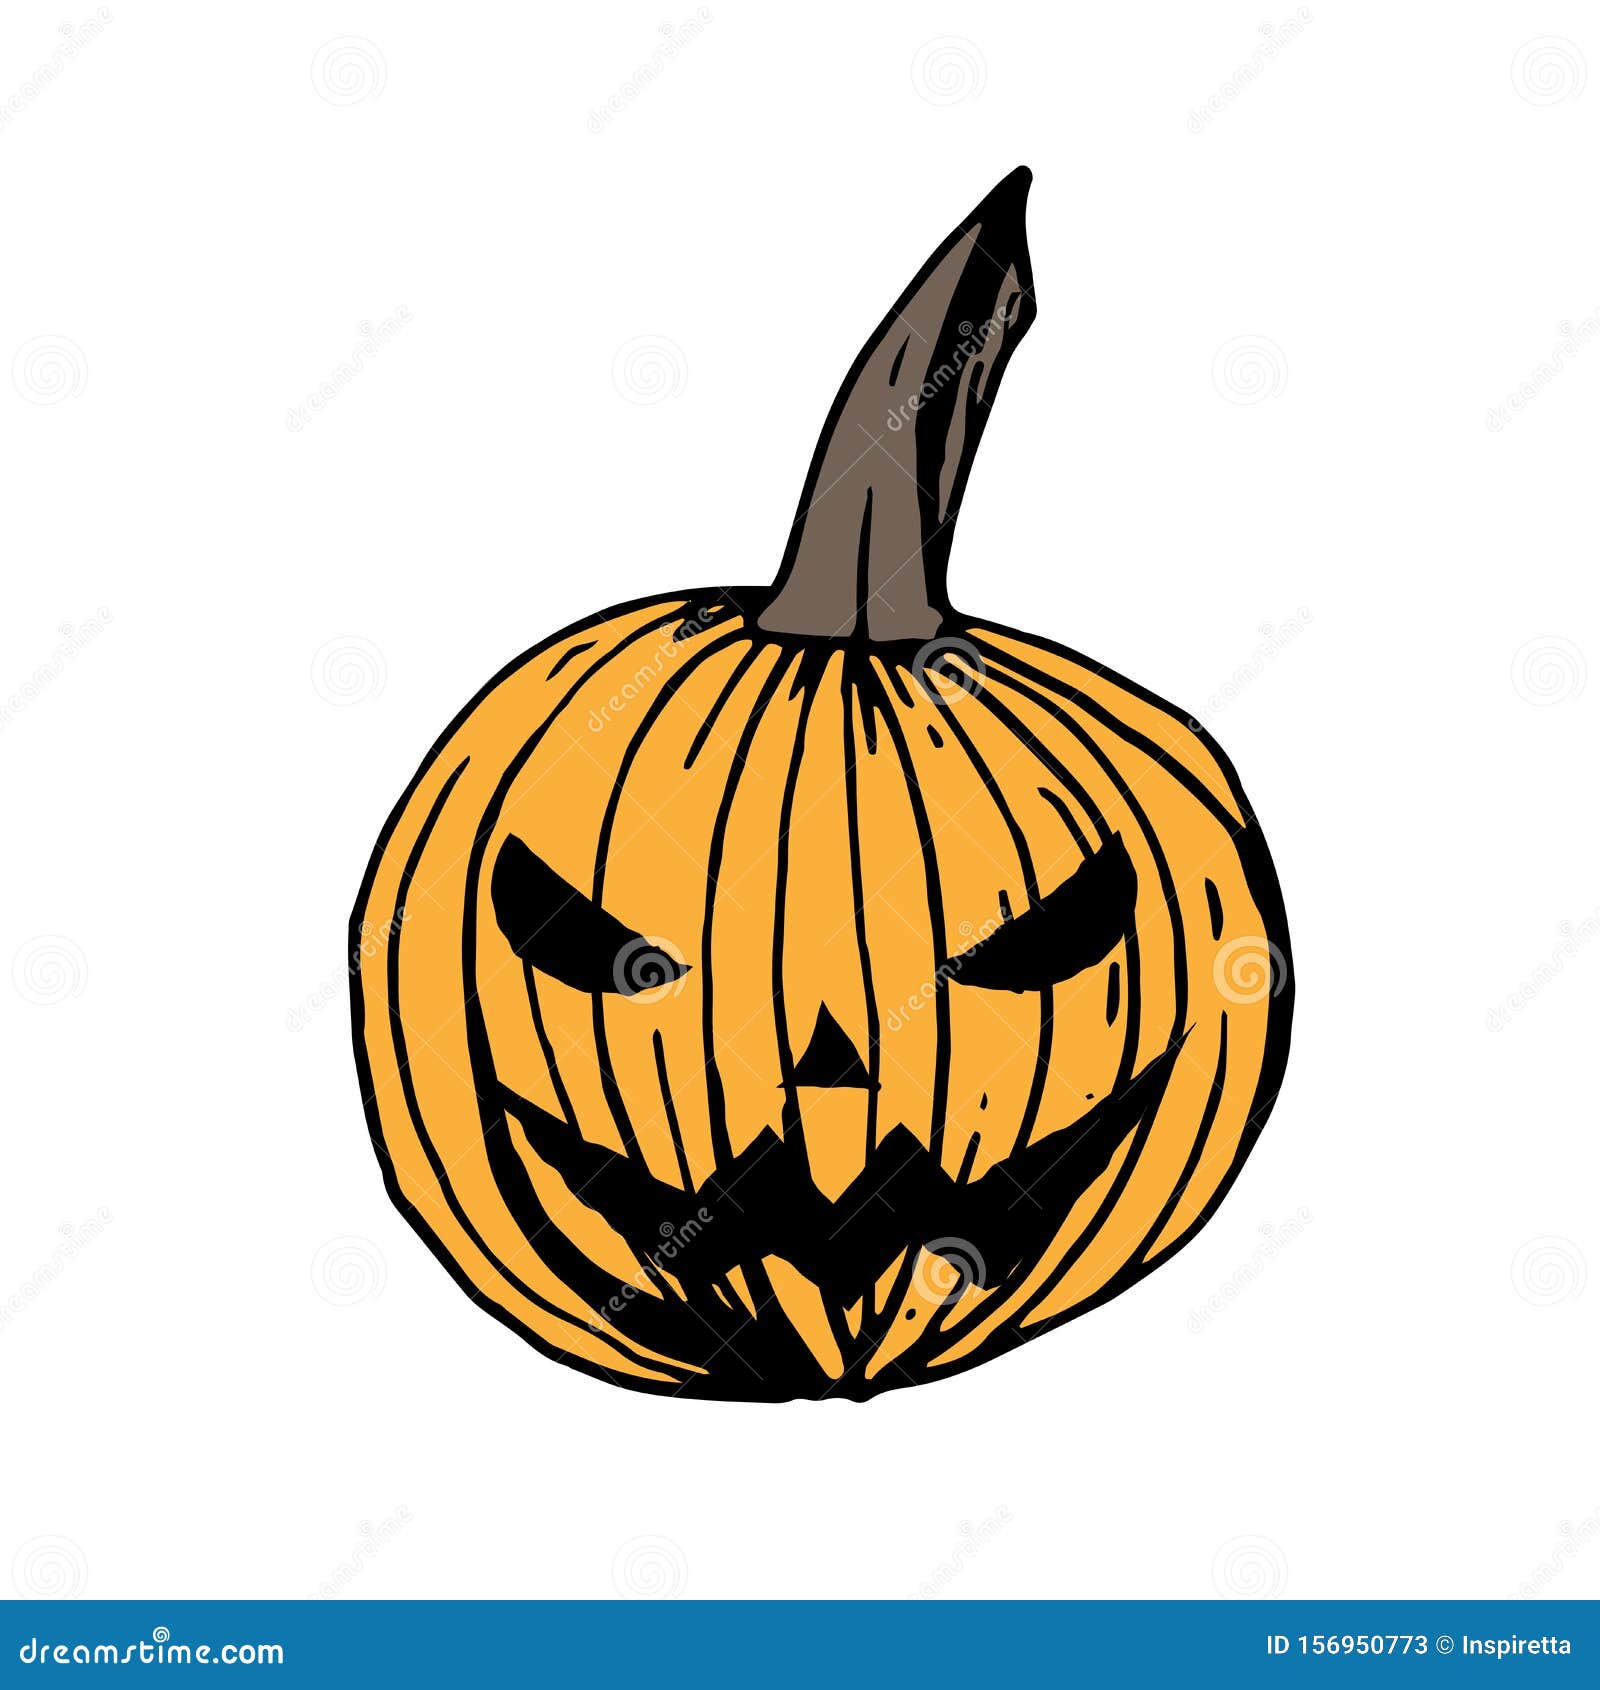 Download Old Fashioned Round Halloween Pumpkin Lantern With With A ...